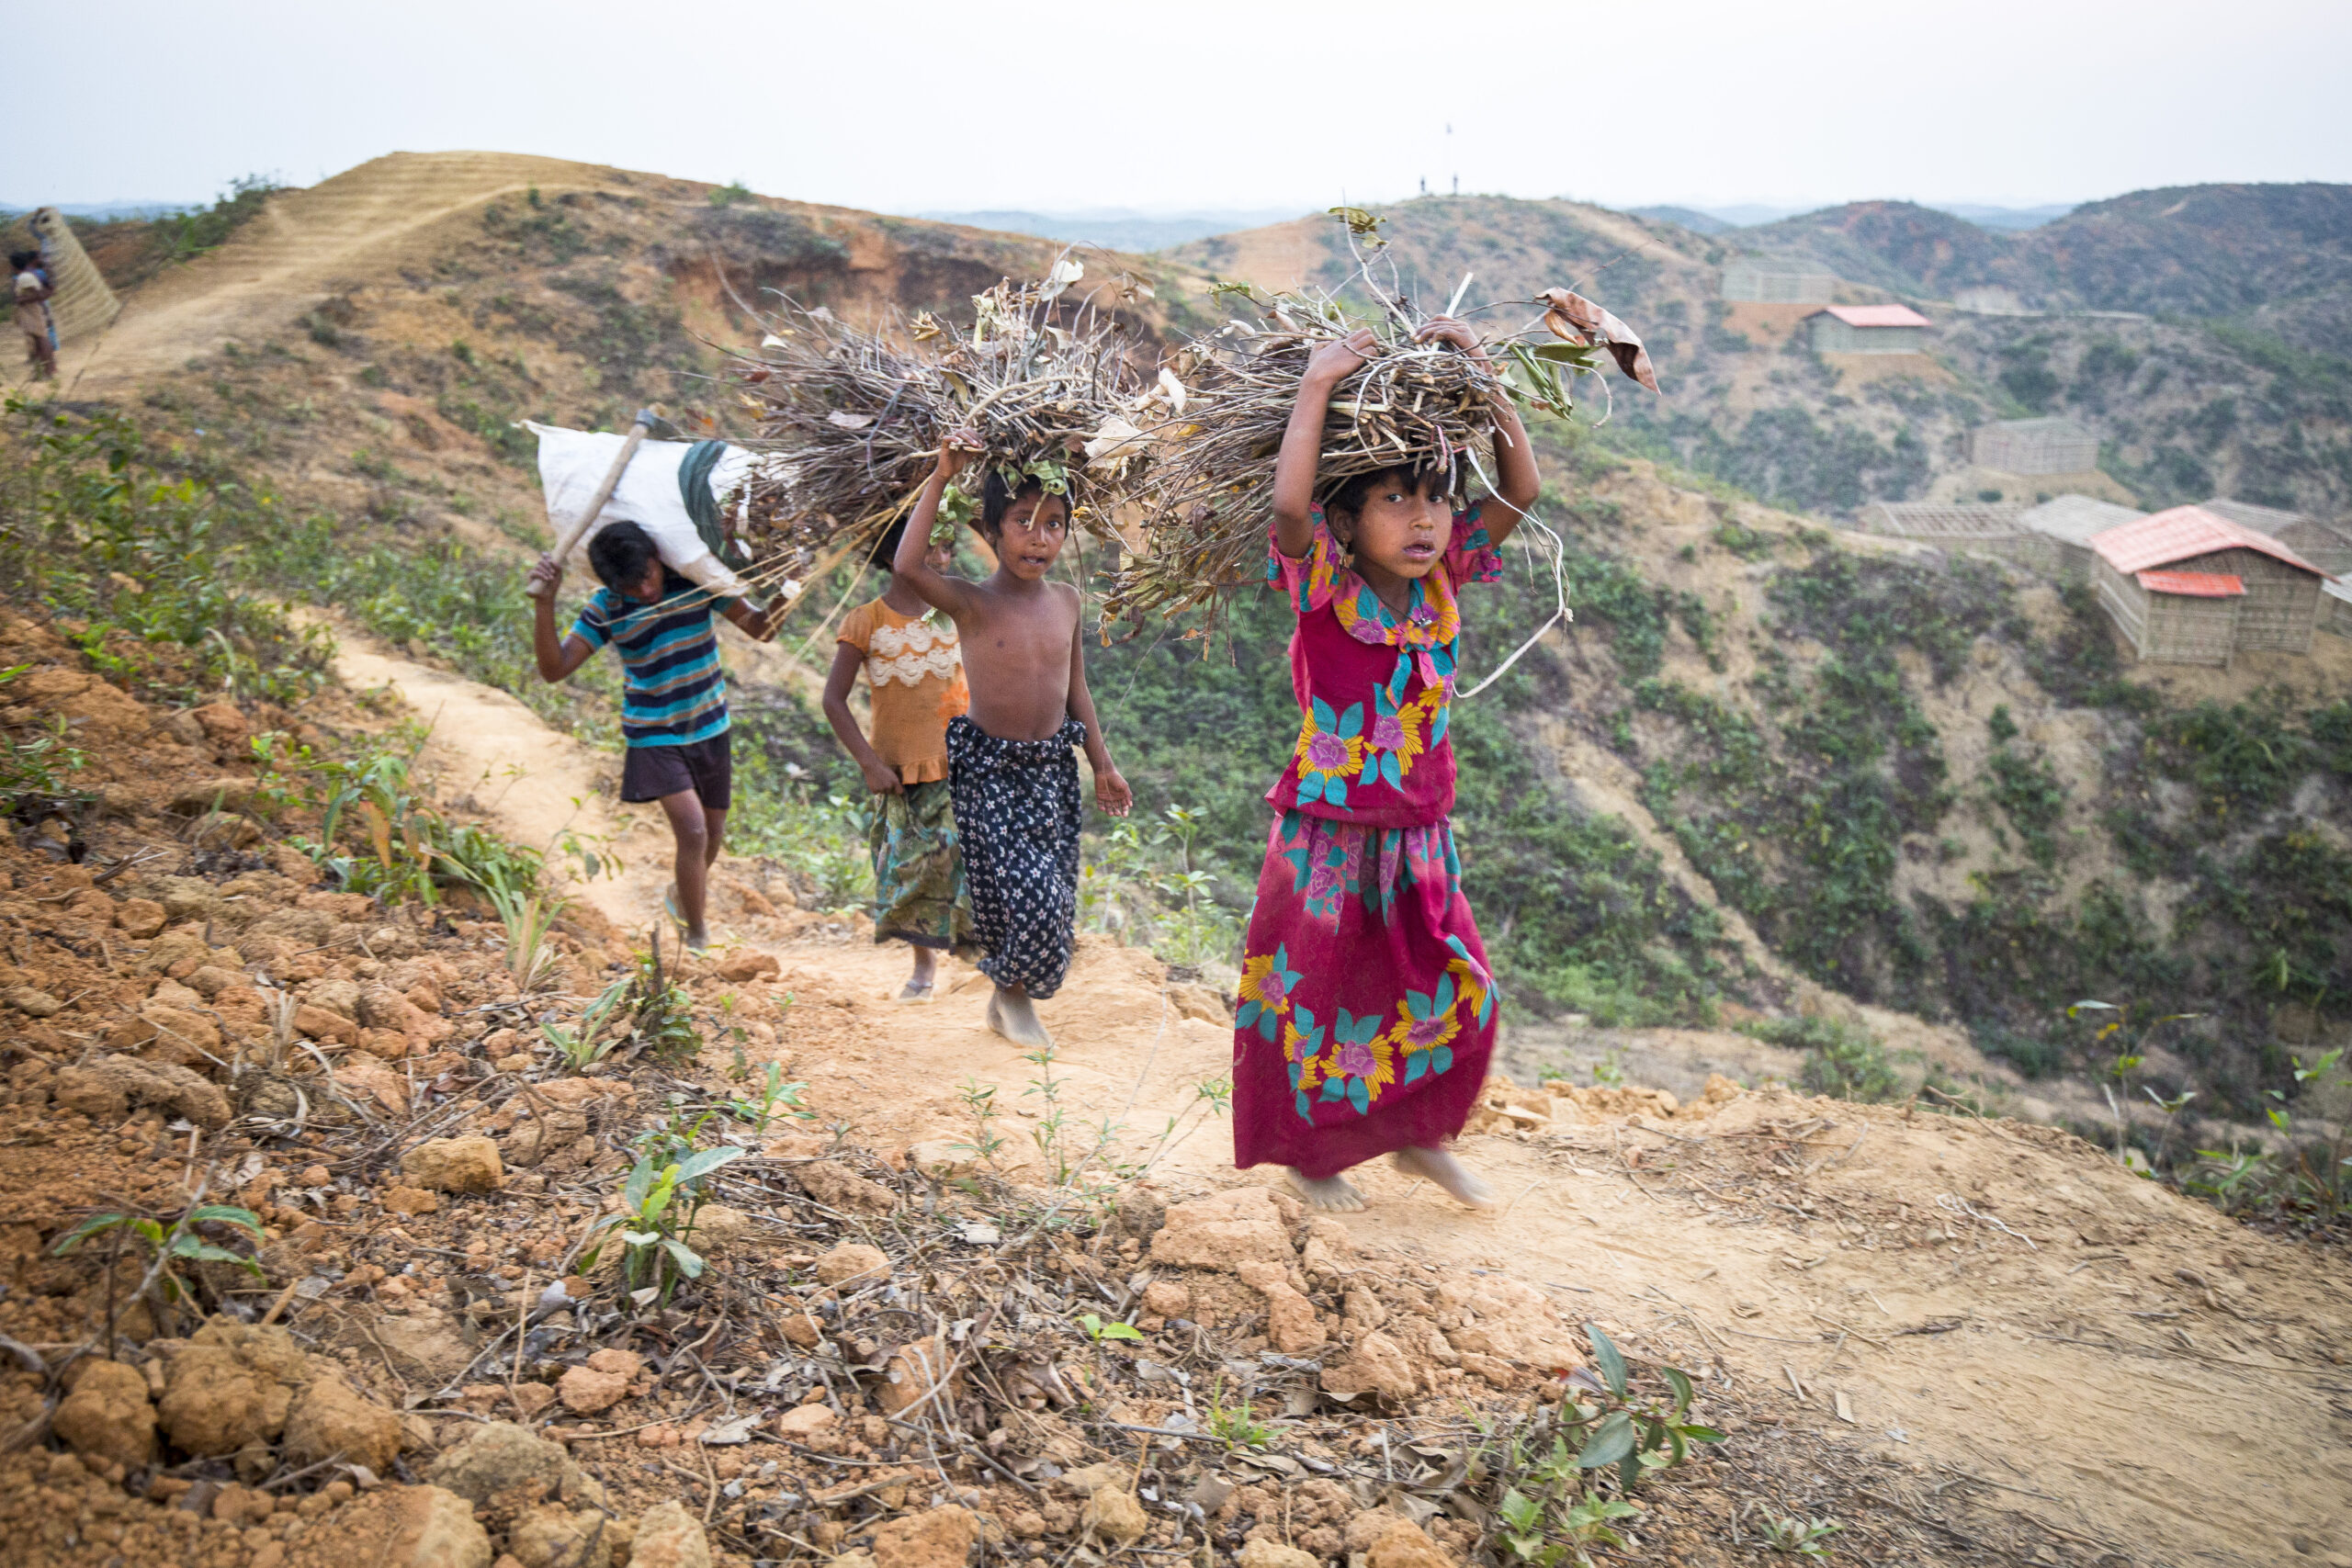 Habiba Begum, 7, in colorful floral dress, Nur Maiza, 8, wearing no shirt, and Maimuna Bibi, 8, in orange top with green skirt collecting firewood on the edge of the forest in Kutupalong Refugee Camp. © UNHCR/Roger Arnold